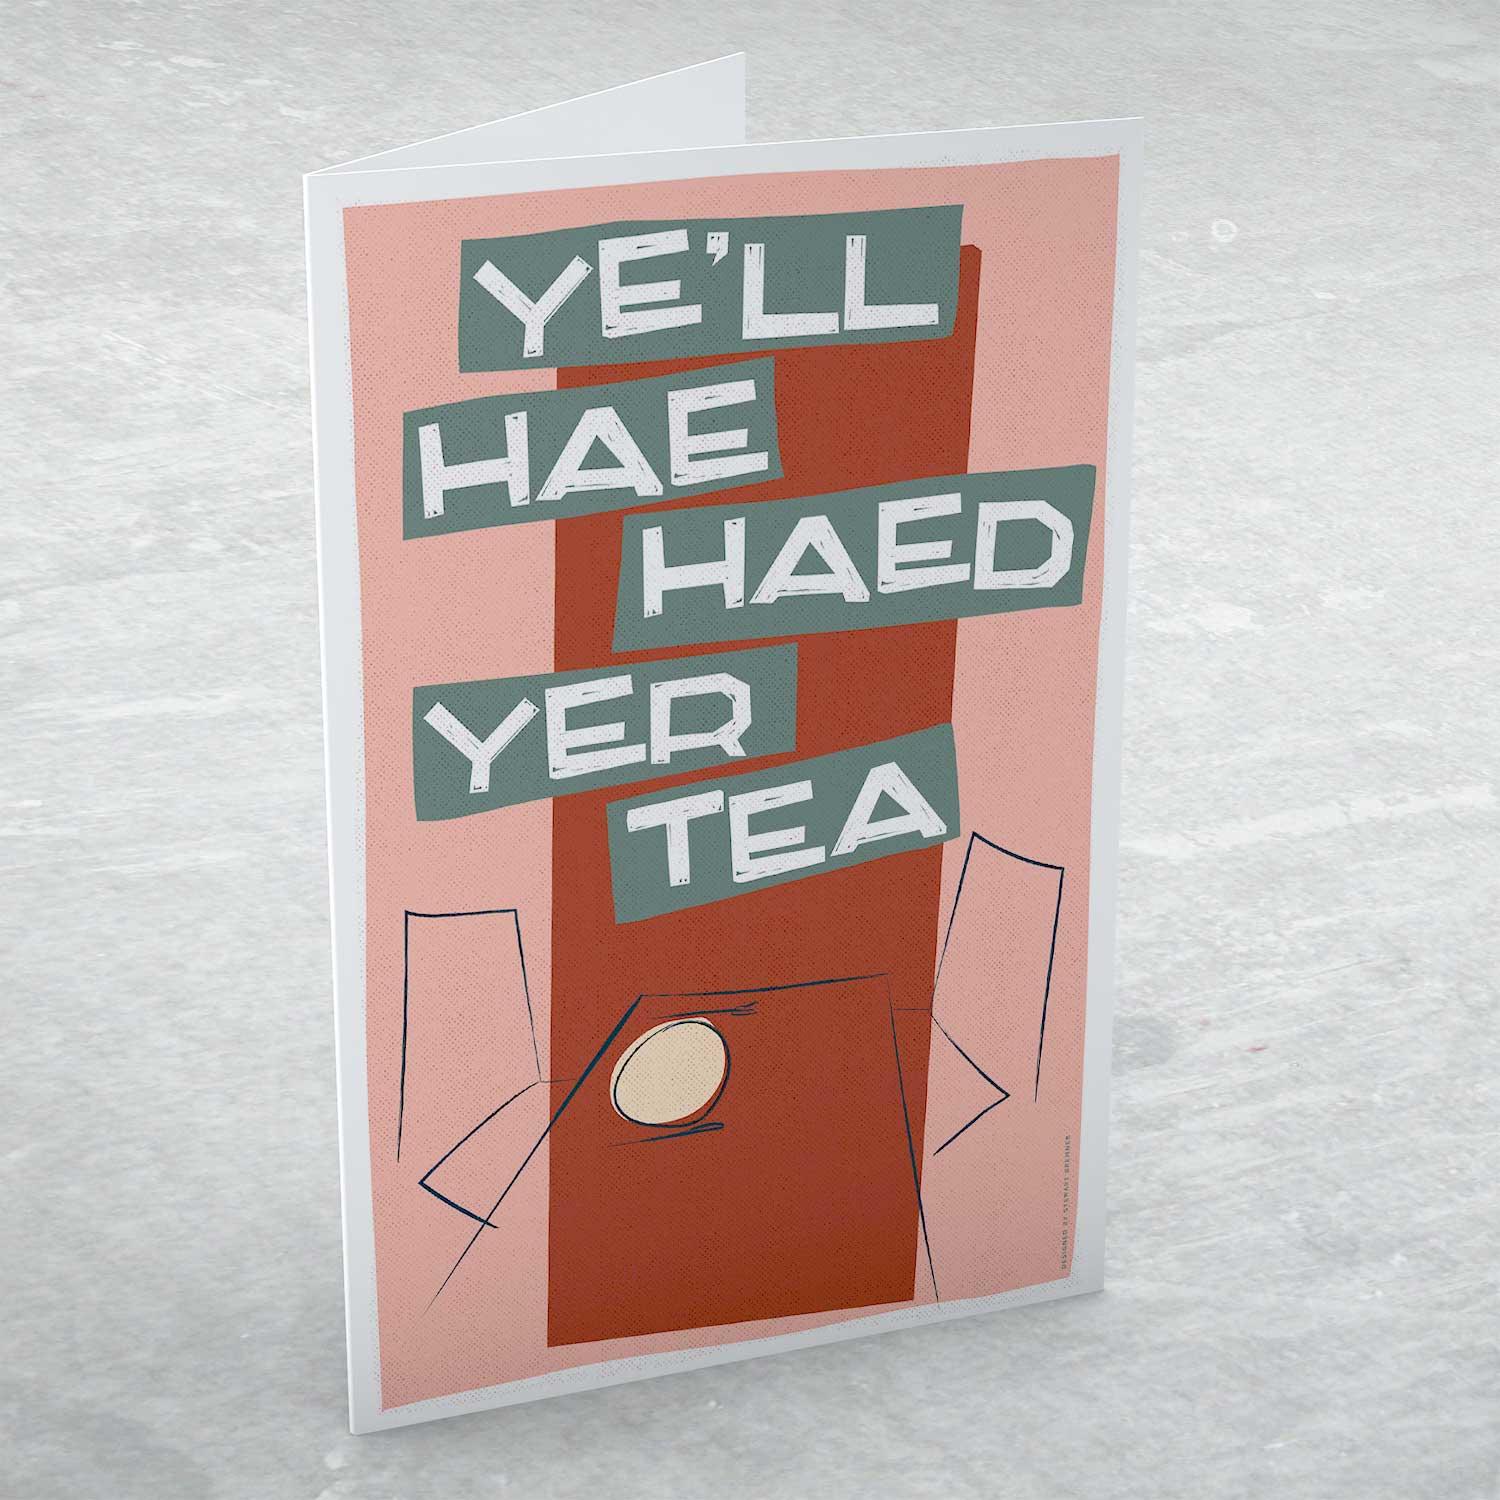 Ye'll hae haed yer tea Greeting Card from an original painting by artist Stewart Bremner